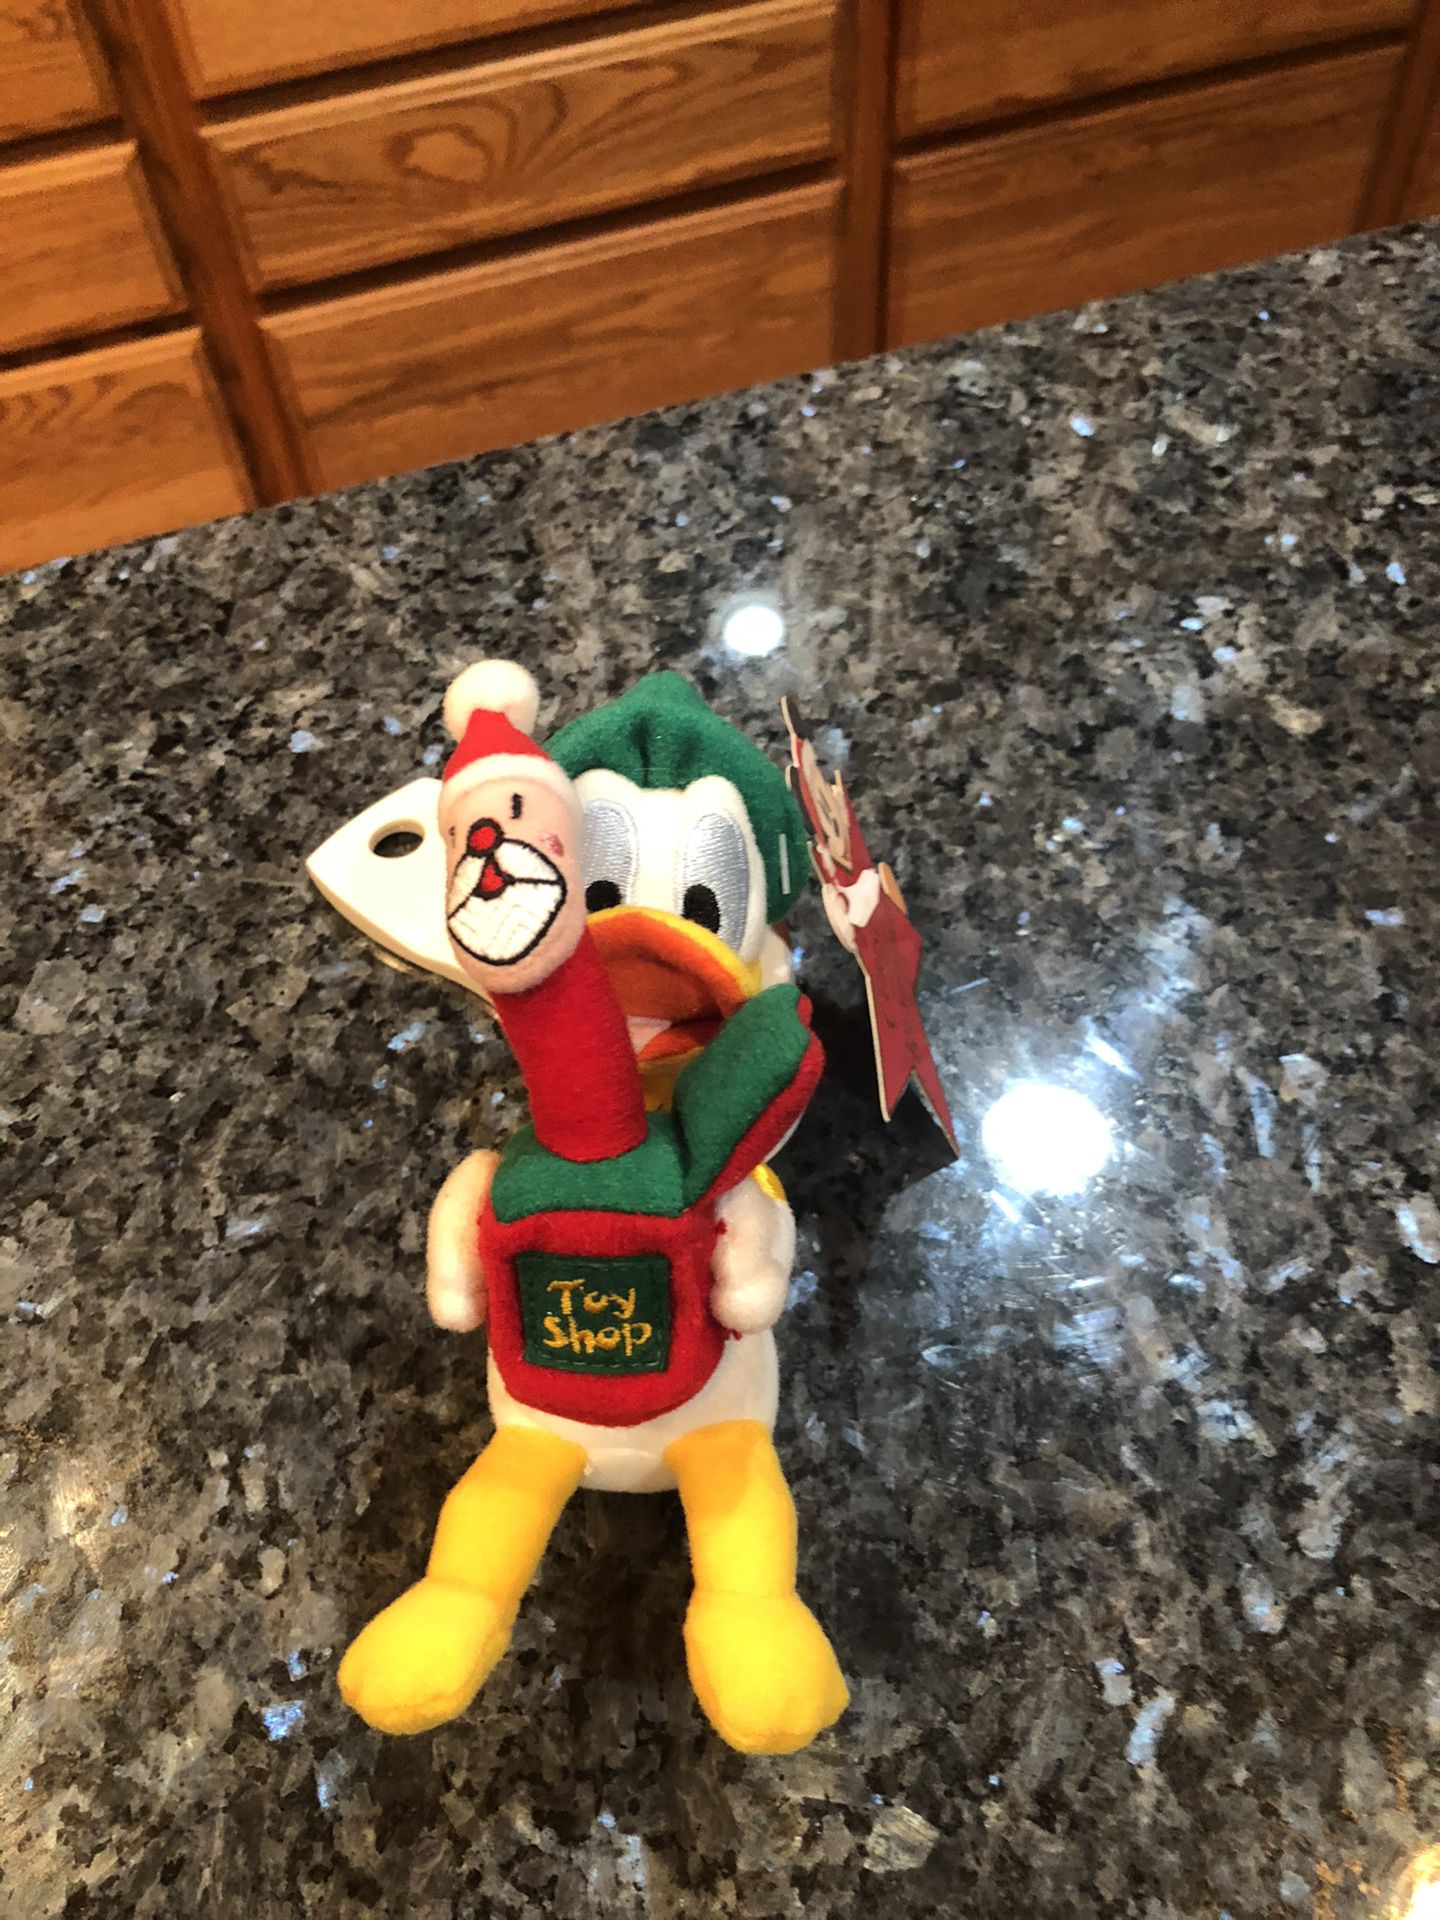 Vintage Disney Donald Duck Christmas Ornament “Toy Shop” Collectable Brand New Size 10 inches